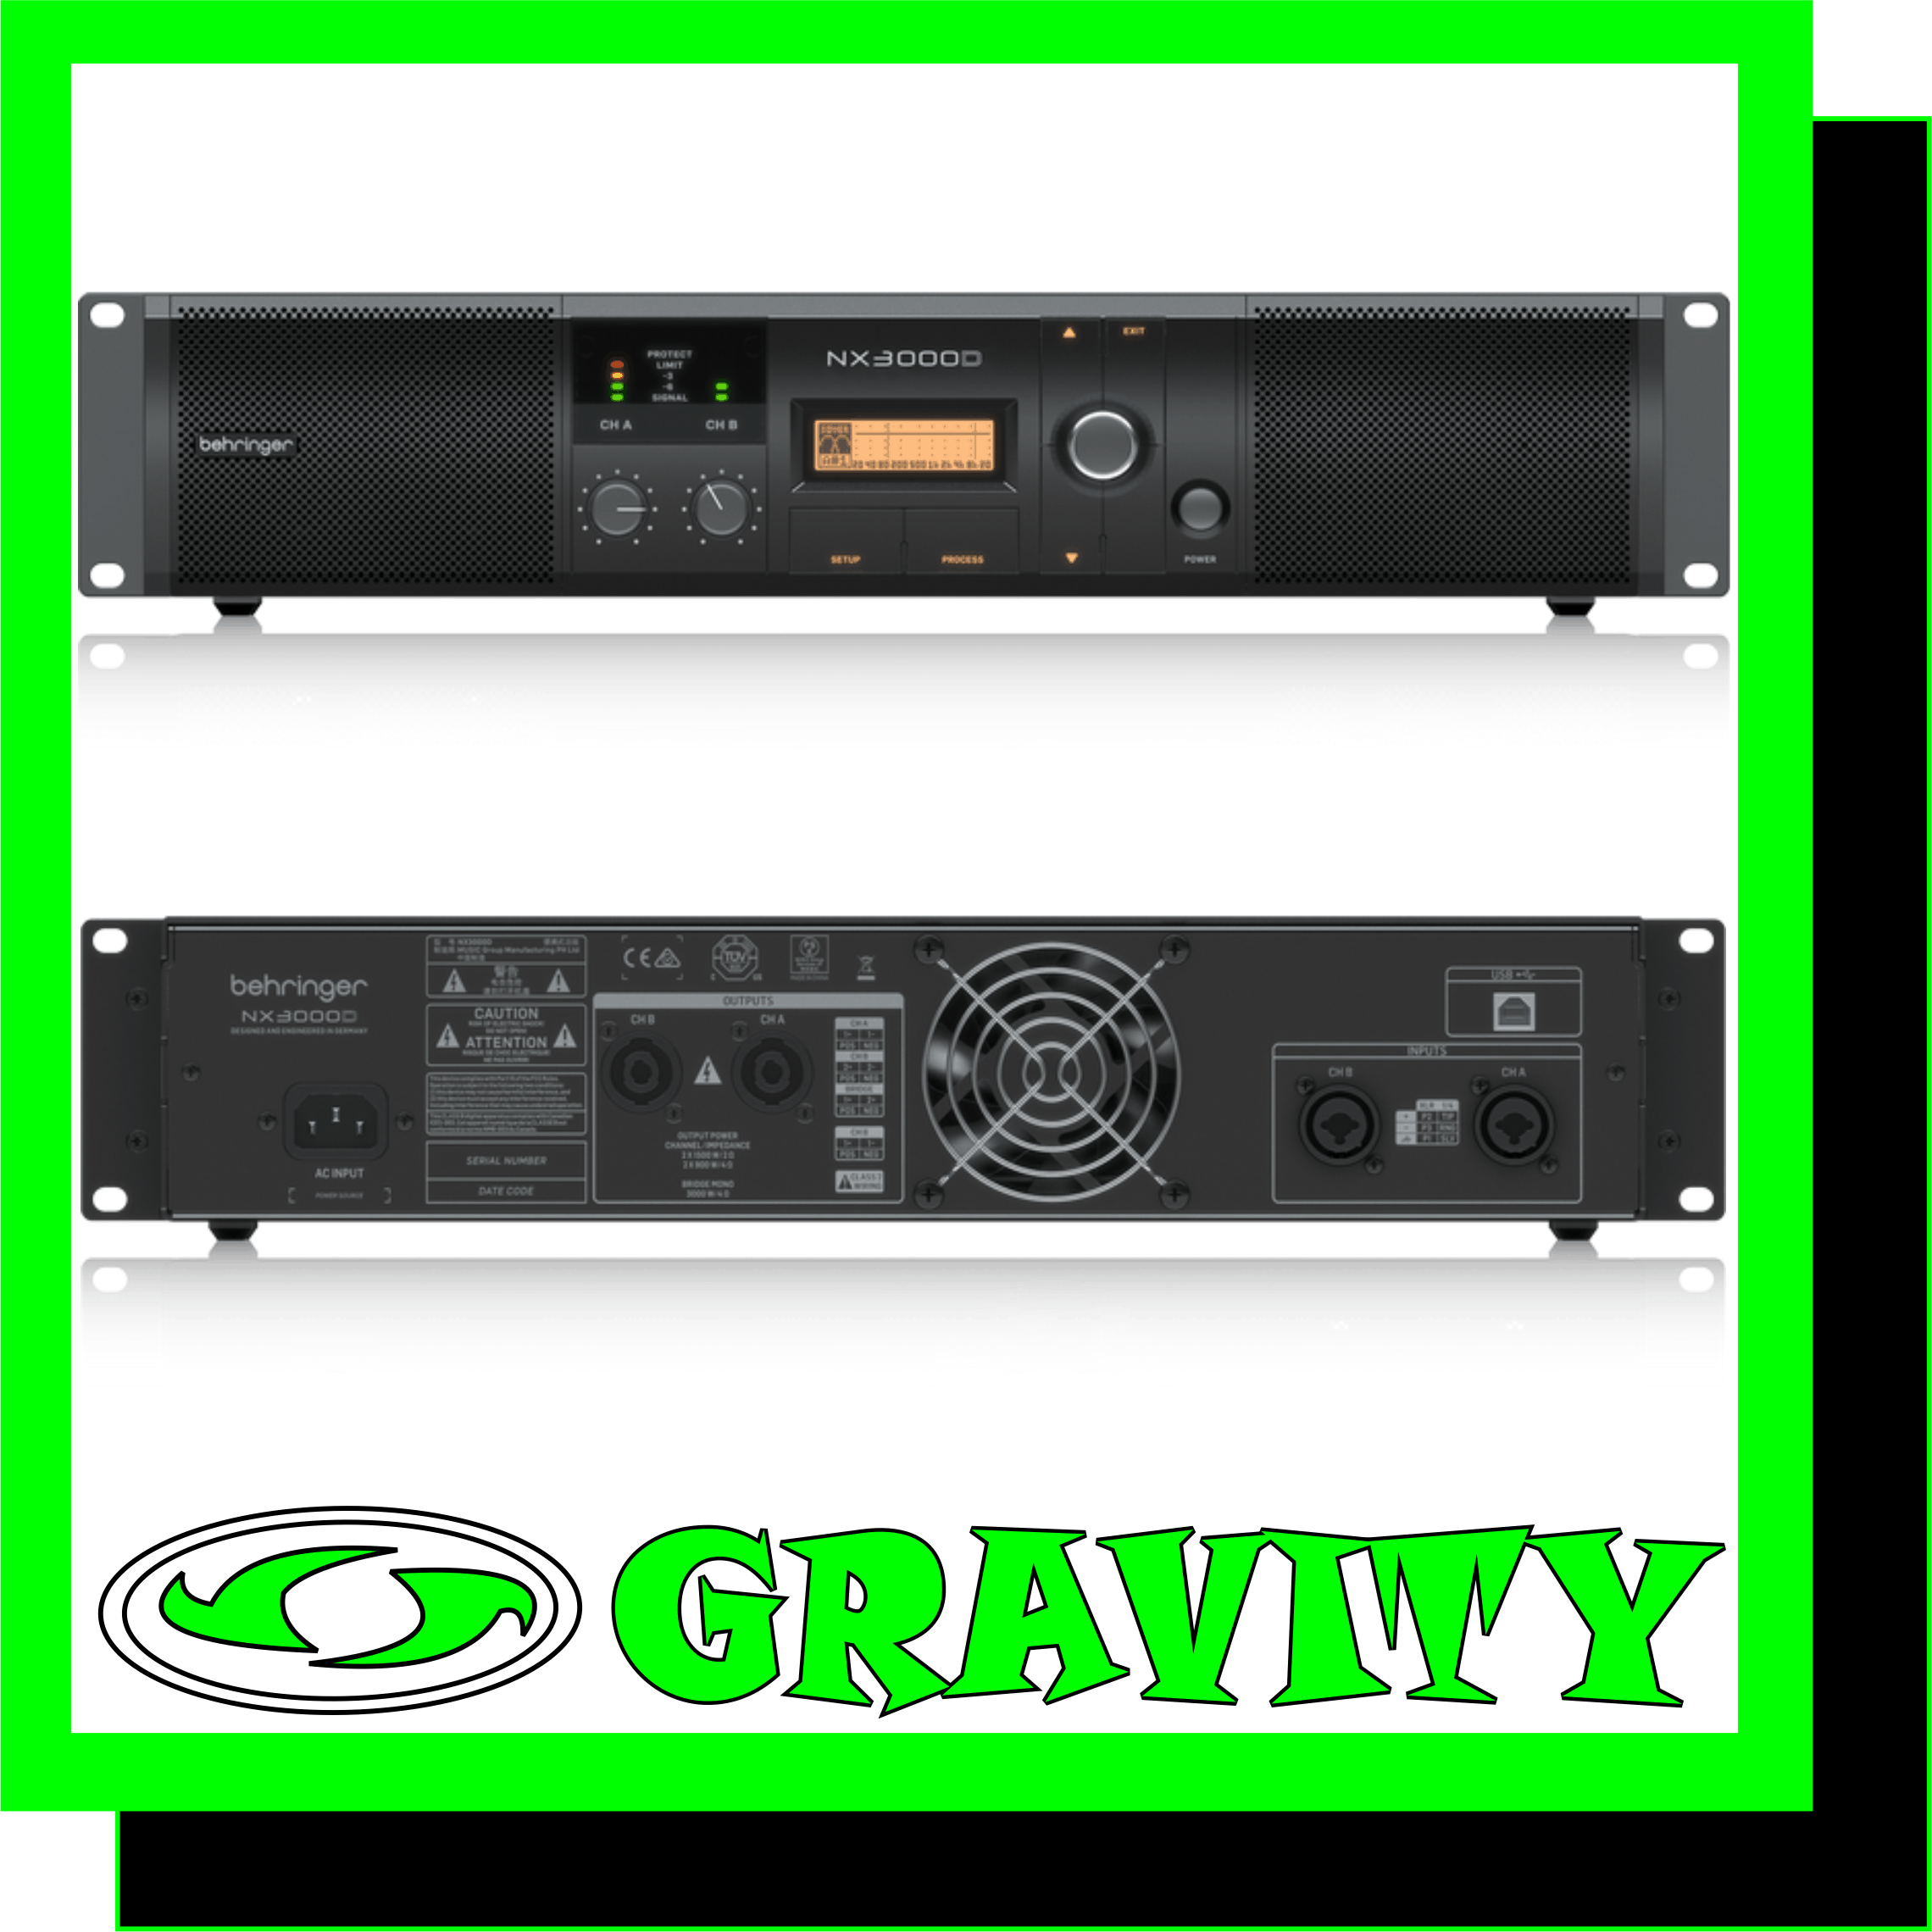 NX3000D Ultra-Lightweight 3000-Watt Class-D Power Amplifier with DSP Control and SmartSense Loudspeaker Impedance Compensation  -Delivers 2 x 1500 Watts into 2 Ohms; 2 x 900 Watts into 4 Ohms; 3000 Watts into 4 Ohms (bridge mode) and weighs less than 7.9 lbs / 3.6 kg -Ultimate reliability through revolutionary cool-running High-Density Class-D technology with “near-zero” thermal buildup -Ultra-efficient switch-mode power supply for noise-free audio, superior transient response and low power consumption -High-performance DSP and 24-bit/96 kHz converters deliver ultimate signal integrity and extreme dynamic range -DSP section features sophisticated delay, crossover (3 filter types, up to 48 dB/octave), EQ (8 parametric, 2 dynamic), dynamics processing and lockable security settings -SmartSense Loudspeaker impedance compensation features fully linear frequency response at any speaker load impedance -Front panel LCD display enables setup and adjustment without PC -Can be set up, controlled and monitored via front panel USB connector. Powerful remote software downloadable at behringer.com -“Zero-Attack” limiters offer maximum output level with reliable overload protection -Built-in Subwoofer/Satellite crossover for perfect subwoofer operation -Detented and illuminated gain controls for precise level setting -Precise 4-segment Signal and Limit LEDs to monitor performance -XLR and 1/4” TRS combination input connectors for compatibility with any source -Professional twist-lock speaker connectors for ultimate reliability -Independent DC, LF and thermal overload protection on each channel automatically protects amplifier and speakers without shutting down the show -“Back-to-front” ventilation system prevents thermal buildup for reliable operation  Class-D – Massive Power, Perfect Sound Thanks to our High-Density Class-D amplifier Technology, we are able to provide you with enormous power and incredible sonic performance in an easy-to-use, ultra-portable and lightweight package. Class-D amplification makes all the difference, offering the ultimate in energy efficiency – and eliminating the need for heavy power supplies and massive heat sinks. This amazing technology makes it possible to design and build extremely-powerful products that are significantly lighter in weight than their traditional counterparts, while using less energy and protecting the environment.  Sublimely Simple Operation The front panel controls and indicators provide your system’s vital signs at a glance. After pressing the Power button, the Power LED lights to show the amp is ready for action. All channels feature positive-detent Gain controls with Signal LEDs that light when a signal is present, as well as Limit LEDs to indicate when the amplifier is running at full capacity. Just as elegant as the front, the rear panel is home to the combo XLR and 1/4? TRS Input connectors, making the NX3000D compatible with virtually any source, balanced or unbalanced. Professional twist-lock speaker sockets are provided to ensure every drop of output power gets to your loudspeakers.  NX DSP For sound engineers requiring high-level control capability, the NX3000D amplifier comes ready for action right out-of-the-box. The built-in DSP and 24-bit/96 kHz converters ensure the ultimate signal integrity with an extremely broad dynamic range. DSP section features sophisticated delay, crossover (3 filter types, up to 48 dB/octave), EQ (8 parametric, 2 dynamic), dynamics processing and lockable security settings. A convenient front panel LCD display allows you to setup and make adjustments directly at the amplifier, without the need for a PC.  SmartSense Impedance Compensation Our new SmartSense Technology puts the punch back into Class-D amplification, providing vastly improved full-range frequency response with more powerfully-dynamic bass, and smoother high-frequency reproduction. The resulting output is no longer dependent on the actual load, but is rendered perfectly ruler flat via impedance compensation. NX3000D’s design also incorporates a significantly-higher damping factor that yields better amplifier control over the loudspeaker for stronger audio reproduction – especially in the LF area.